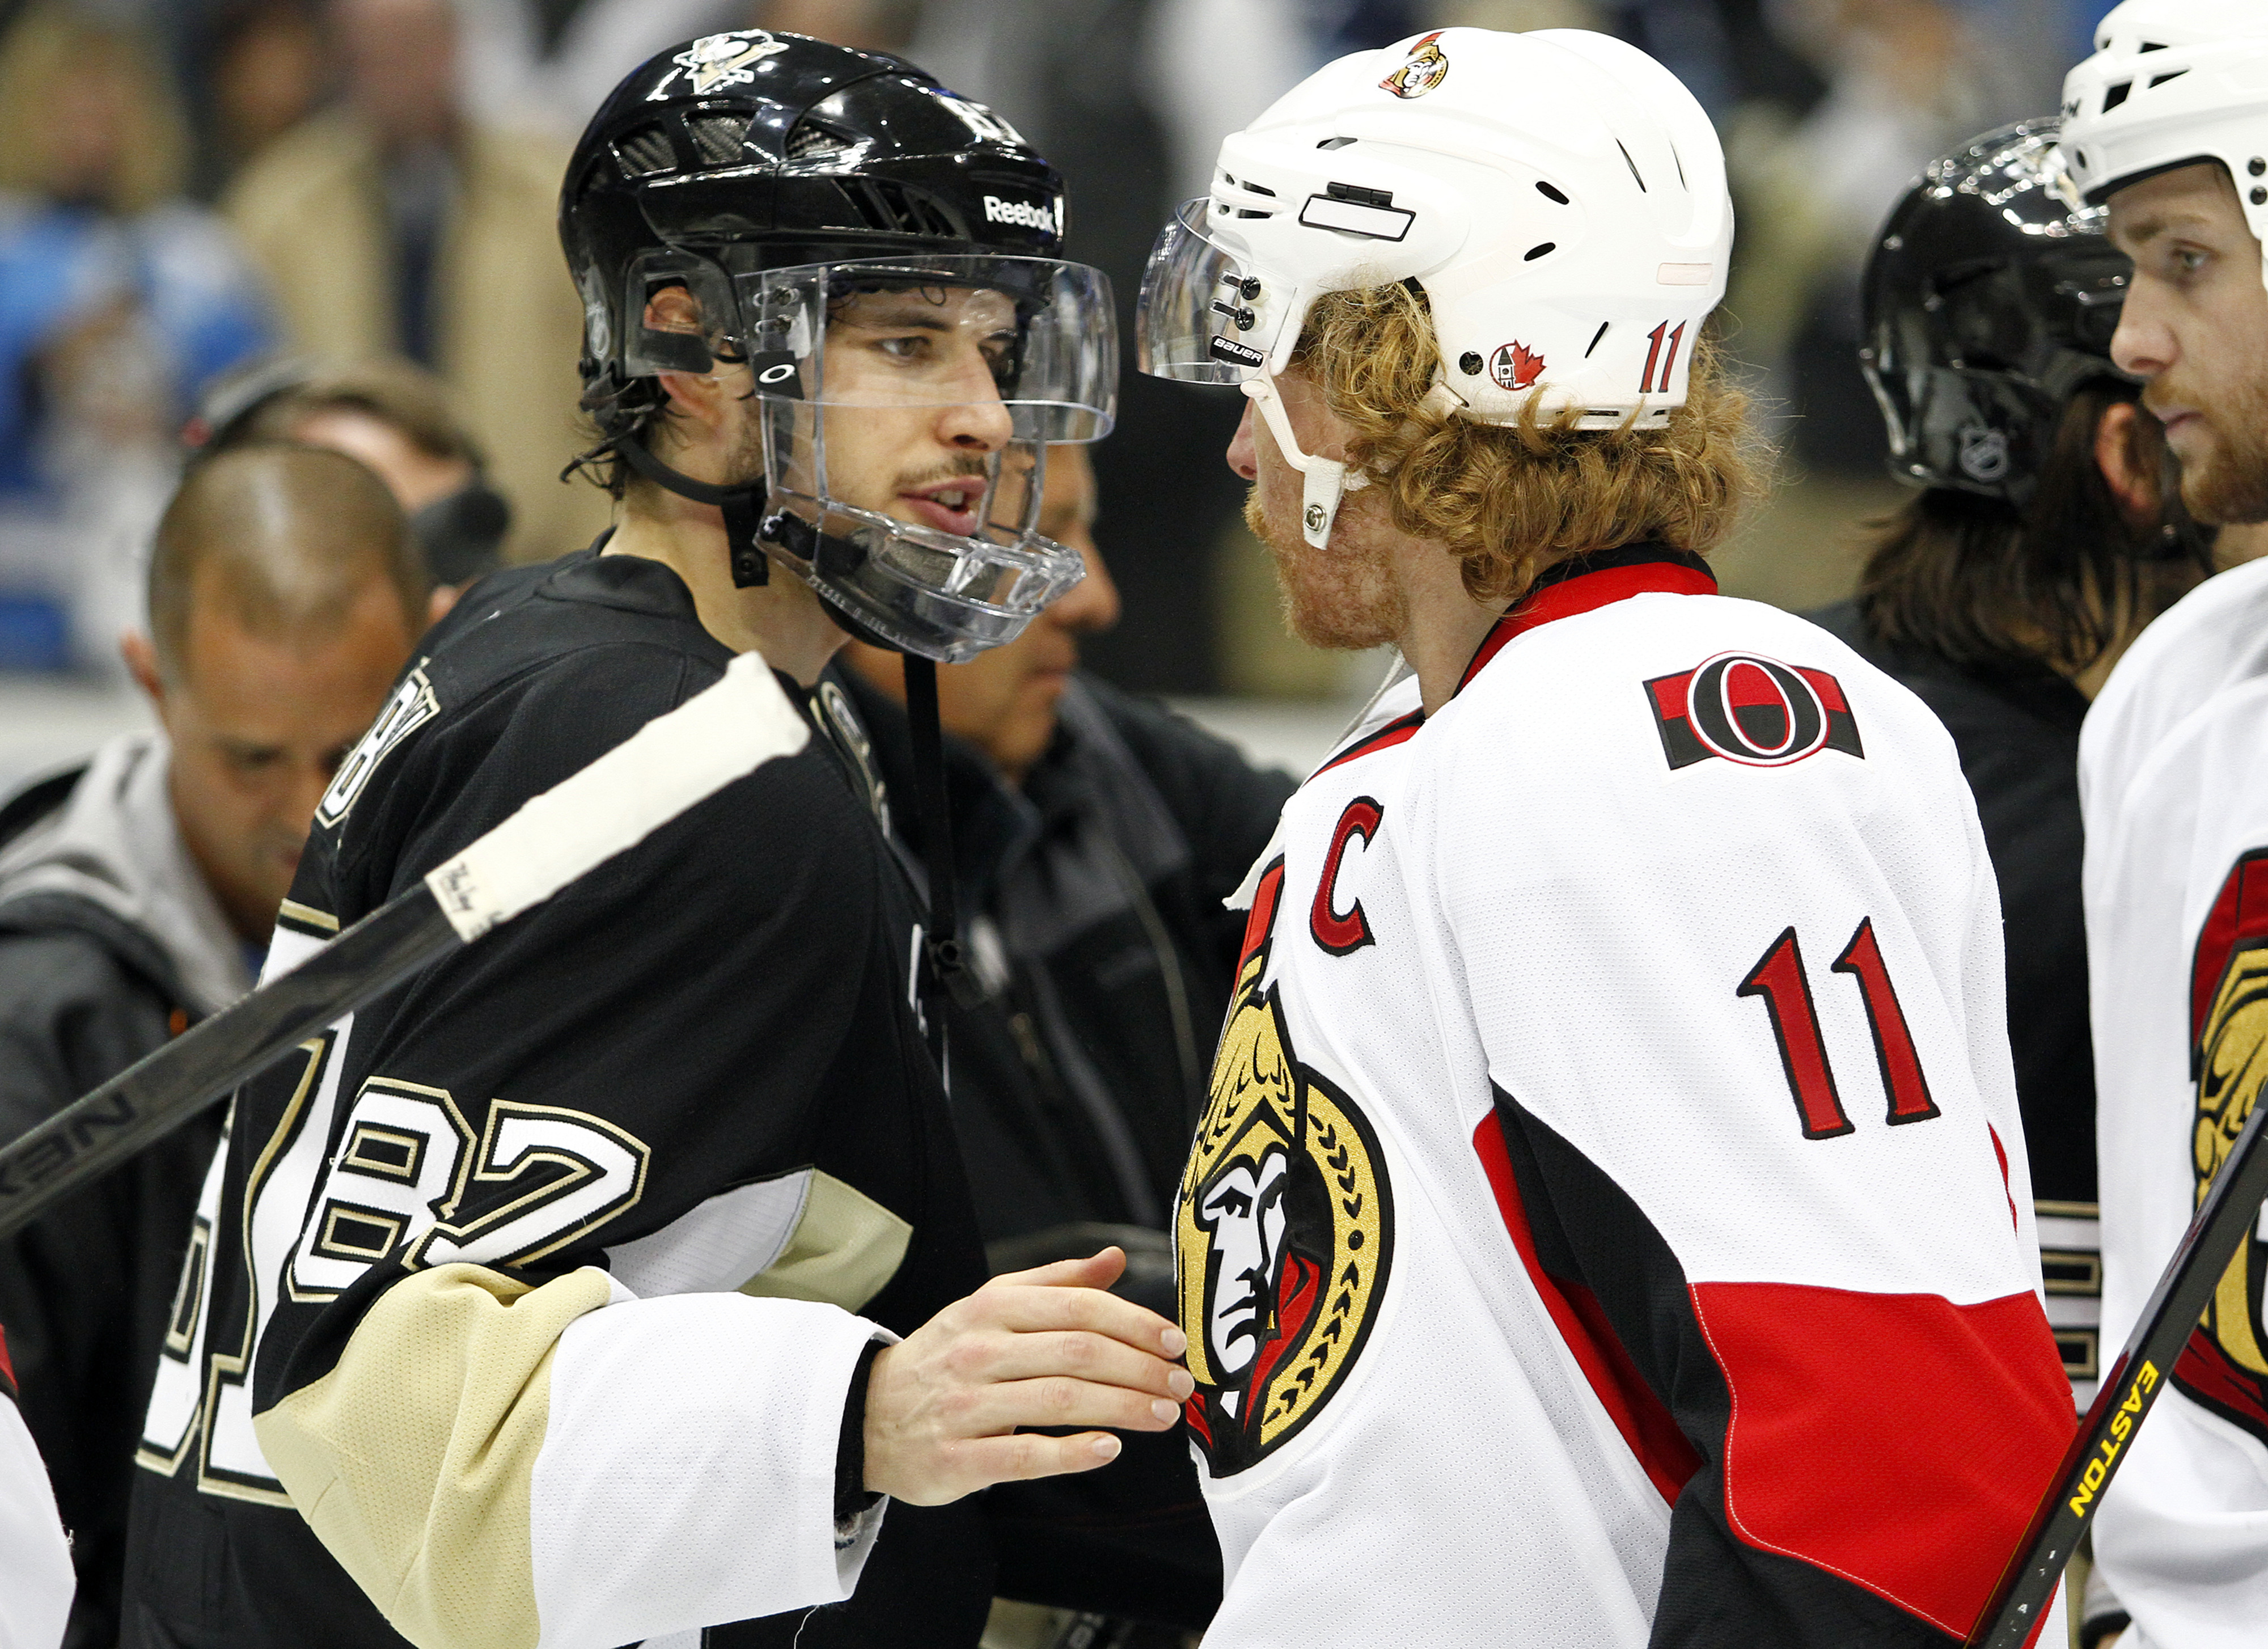 "Hey, Sid, I only missed one game with a broken jaw. Just FYI."